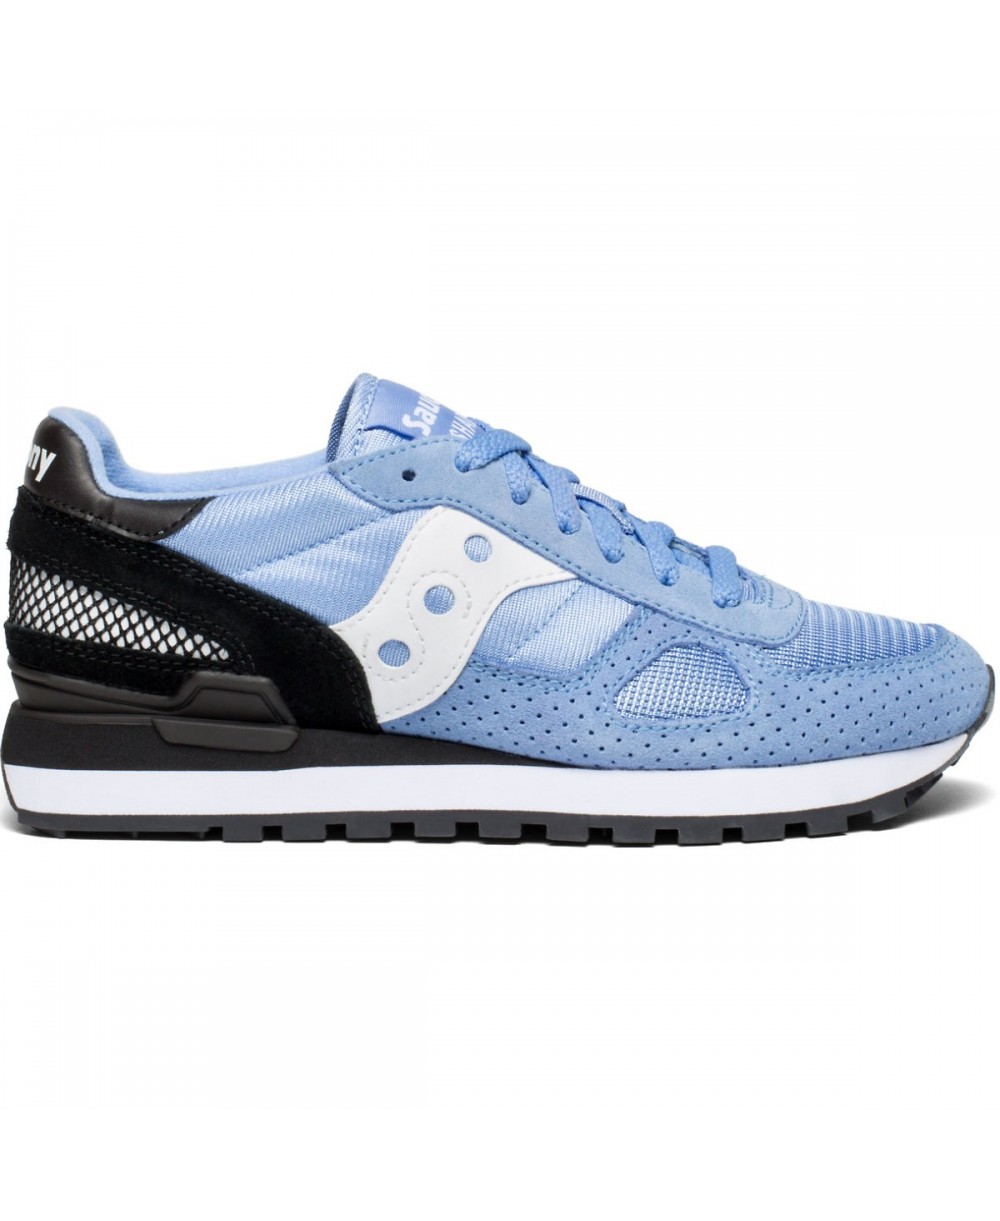 saucony chaussures femme 2018